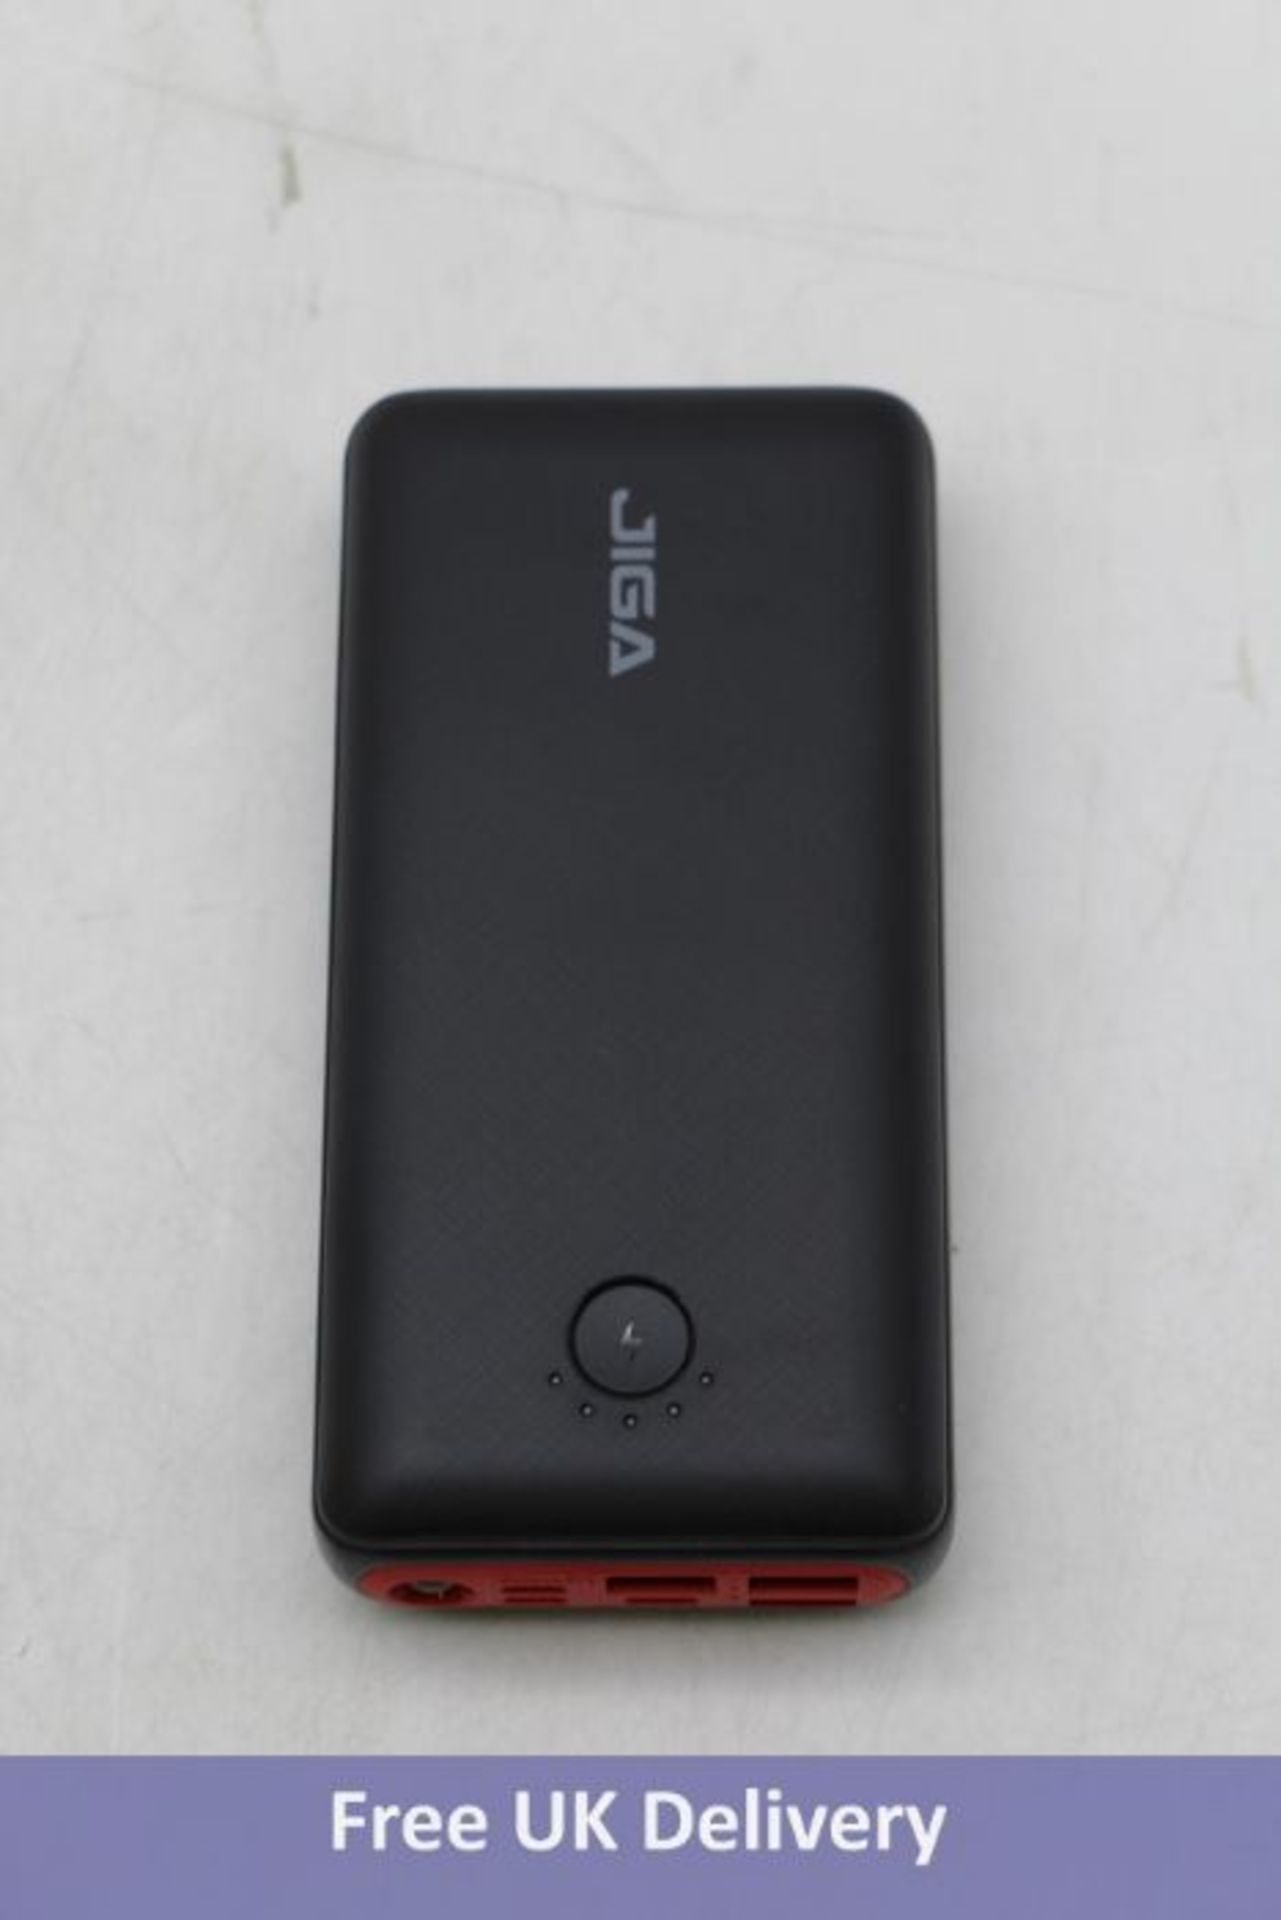 Six JIGA Power Banks, 30000mAh Portable Chargers with 3 Outputs/3 Inputs - Image 2 of 2